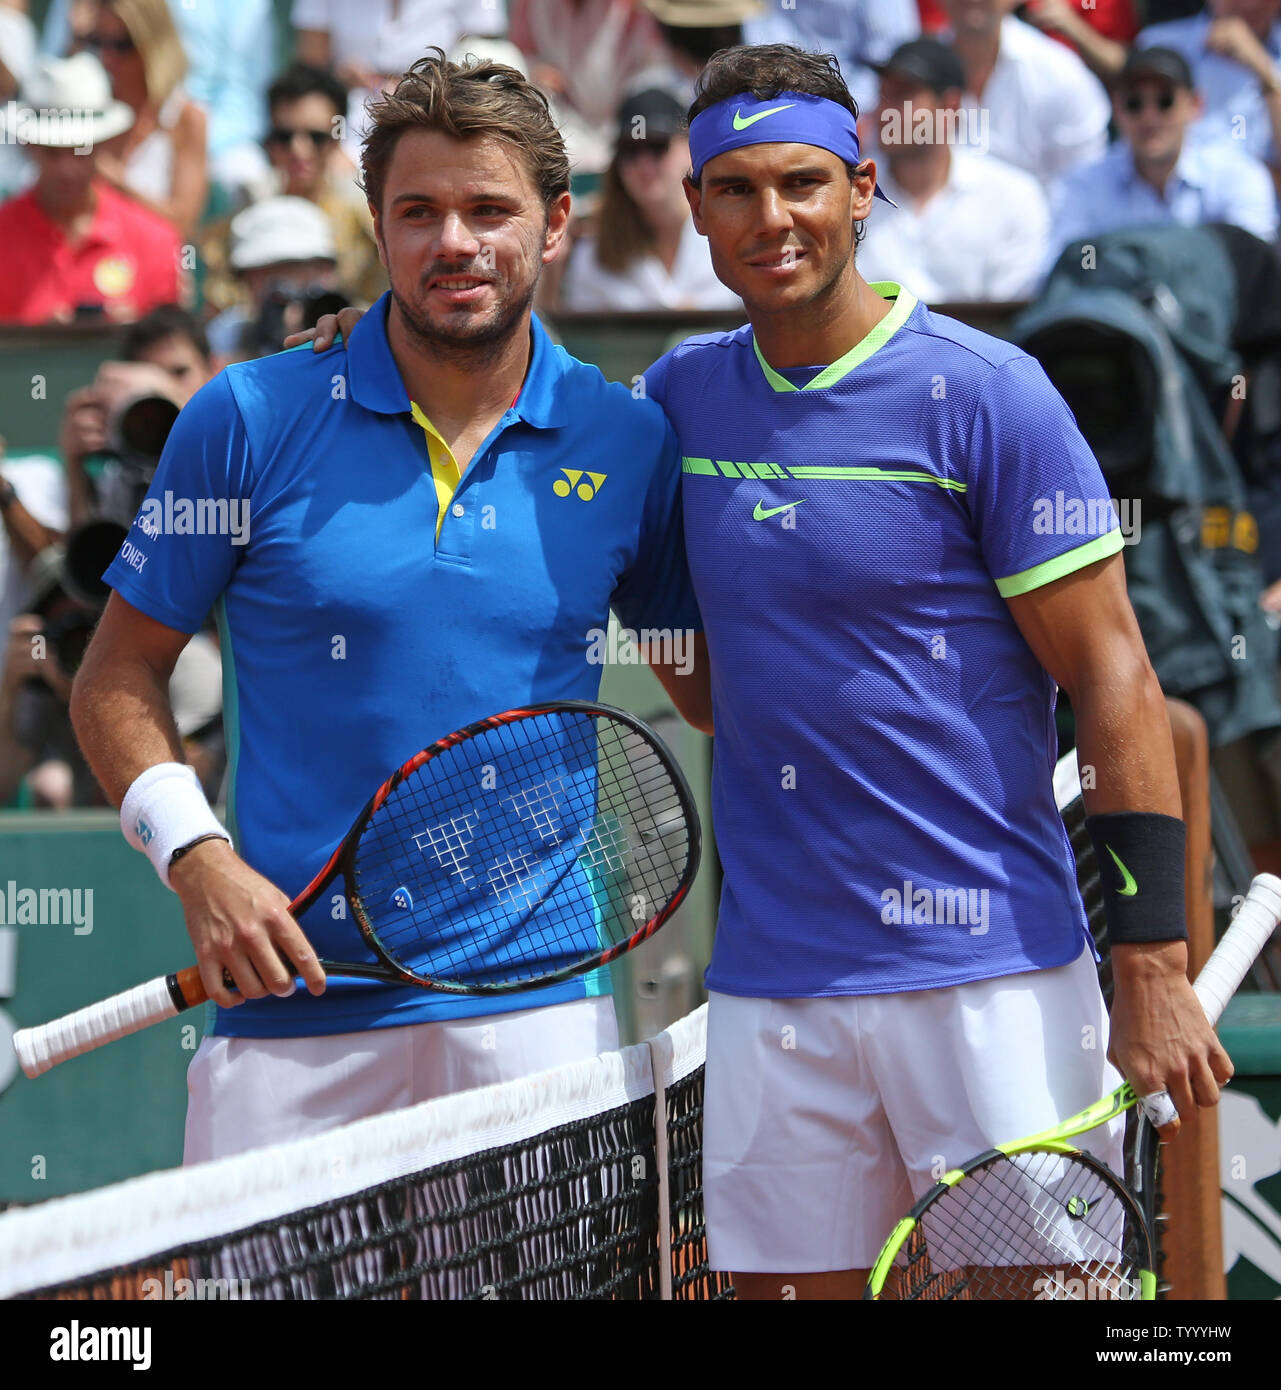 Stan Wawrinka (L) of Switzerland and Rafael Nadal of Spain meet at the net  before their French Open men's final match at Roland Garros in Paris on  June 11, 2017. Photo by